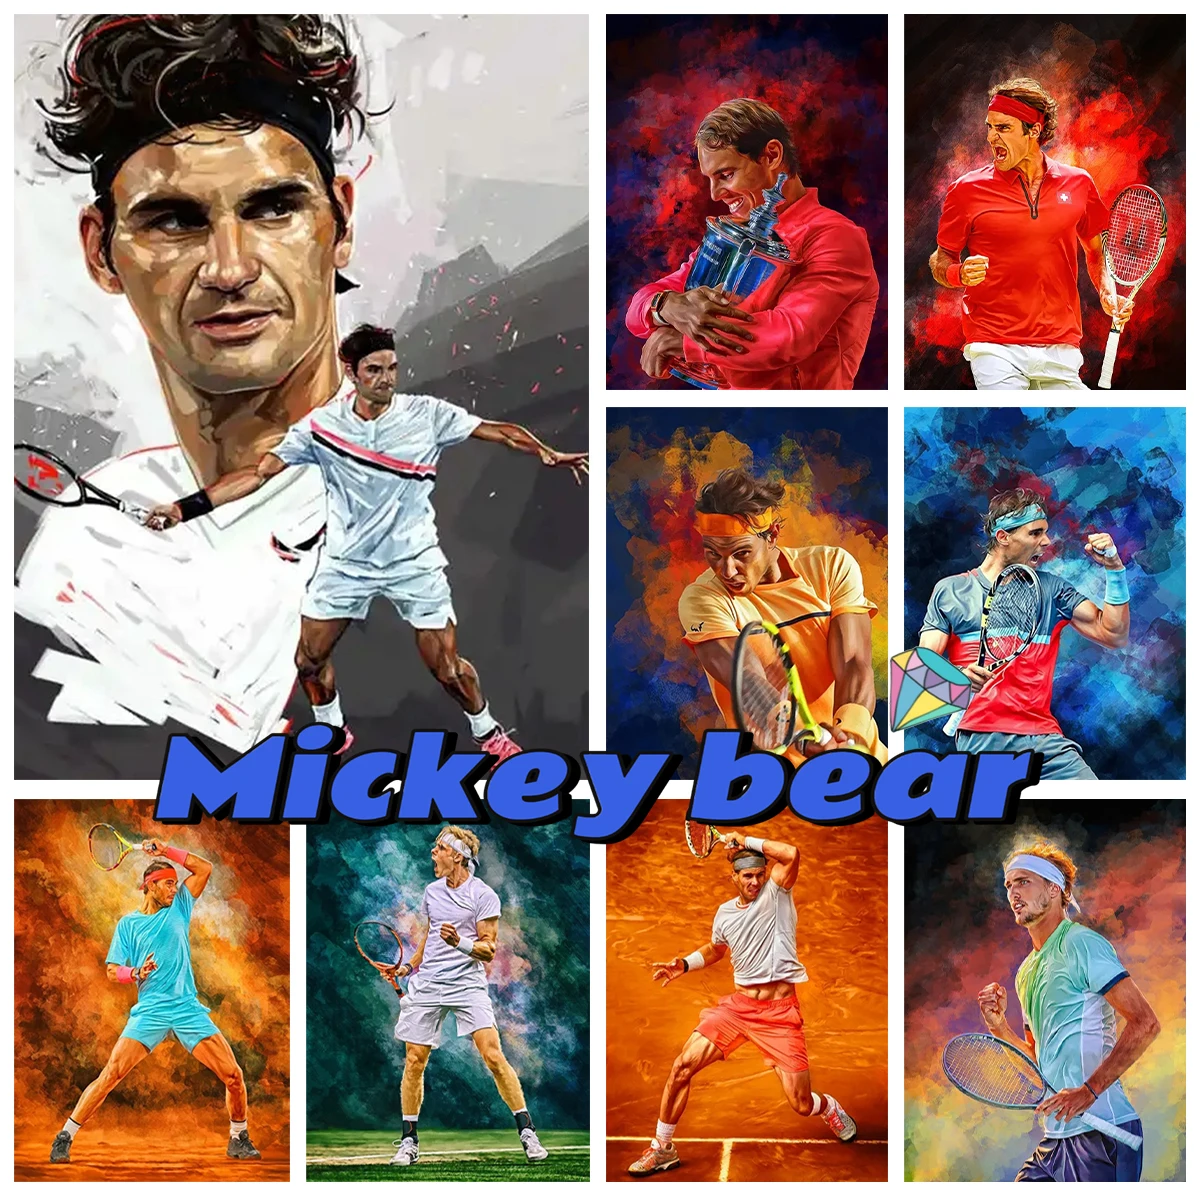 

Diy 5D Diamond Art Painting World Tennis Player Full Rhinestones Embroidery Mosaic Picture Cross Stitch Home Decor New Arrivals